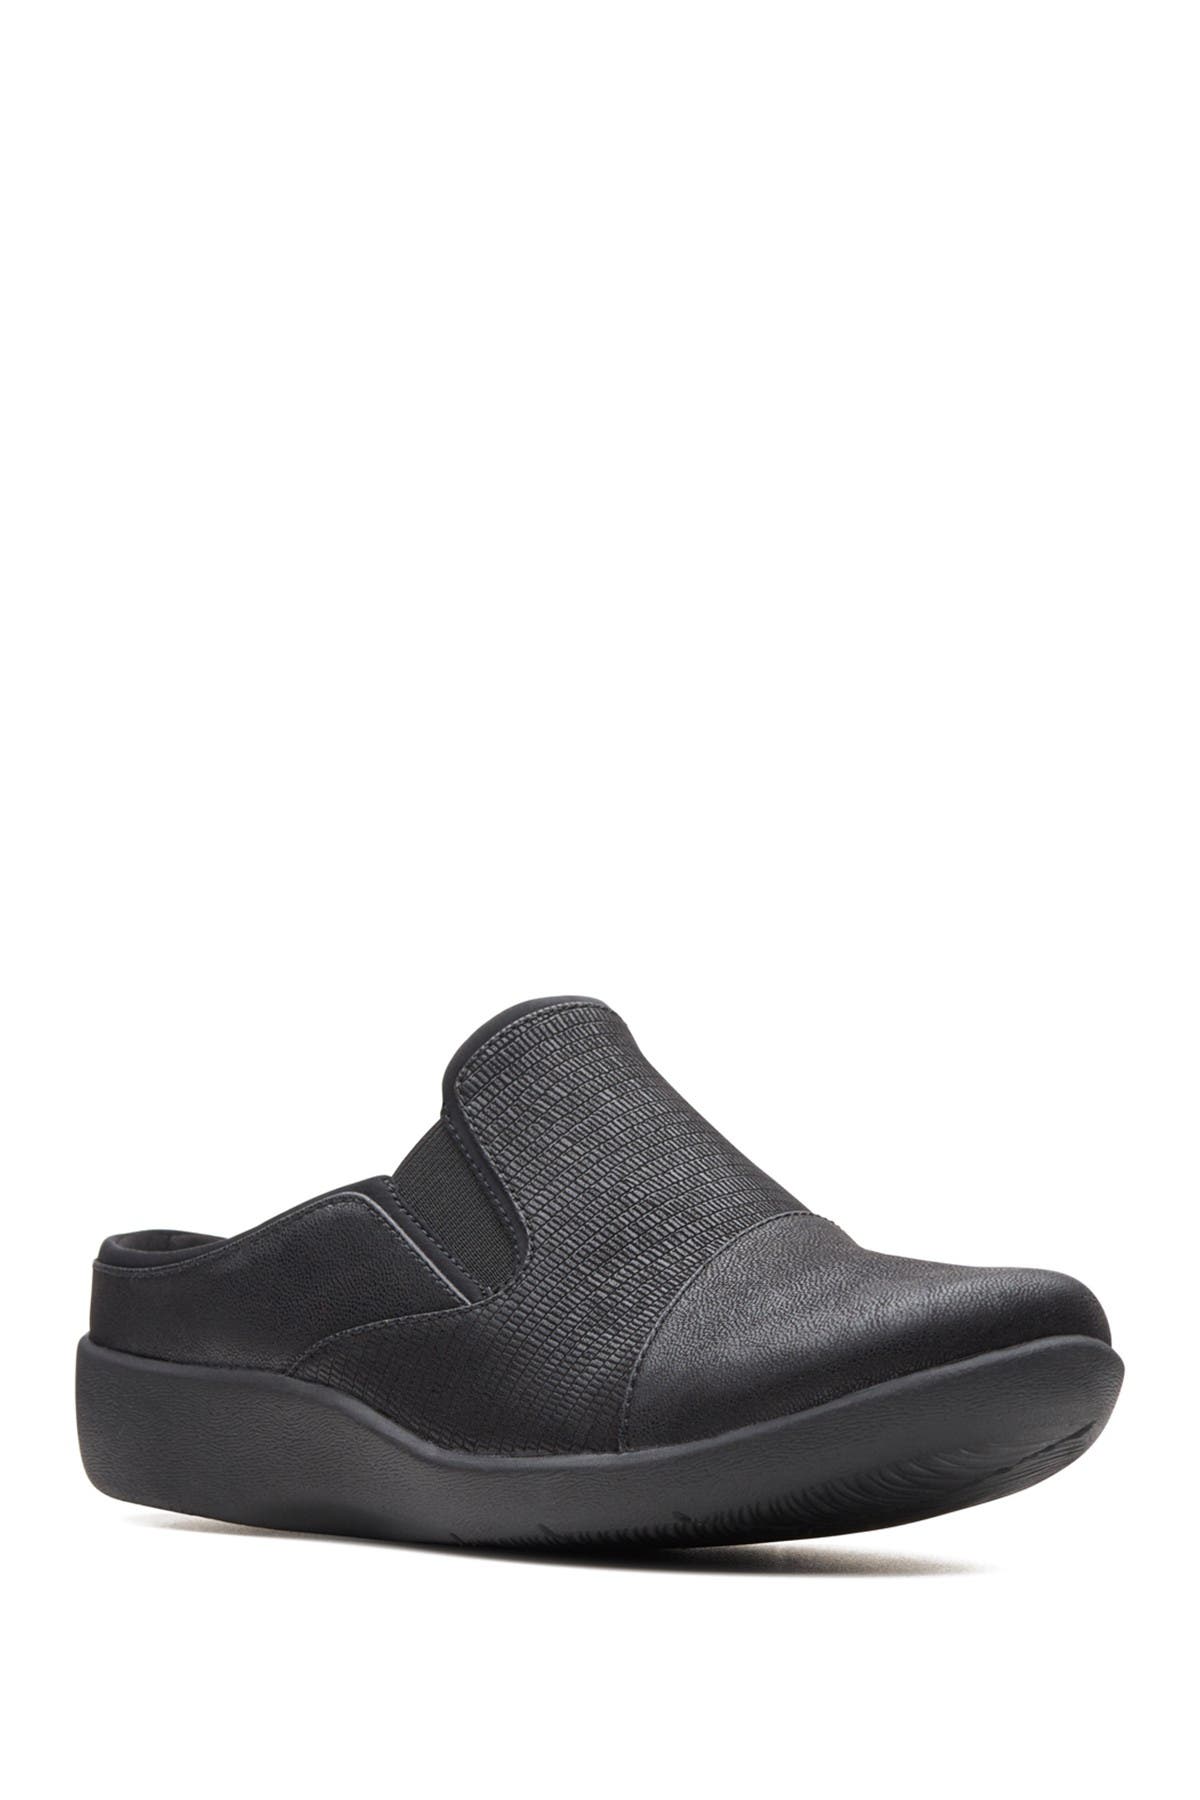 clarks wide width shoes canada